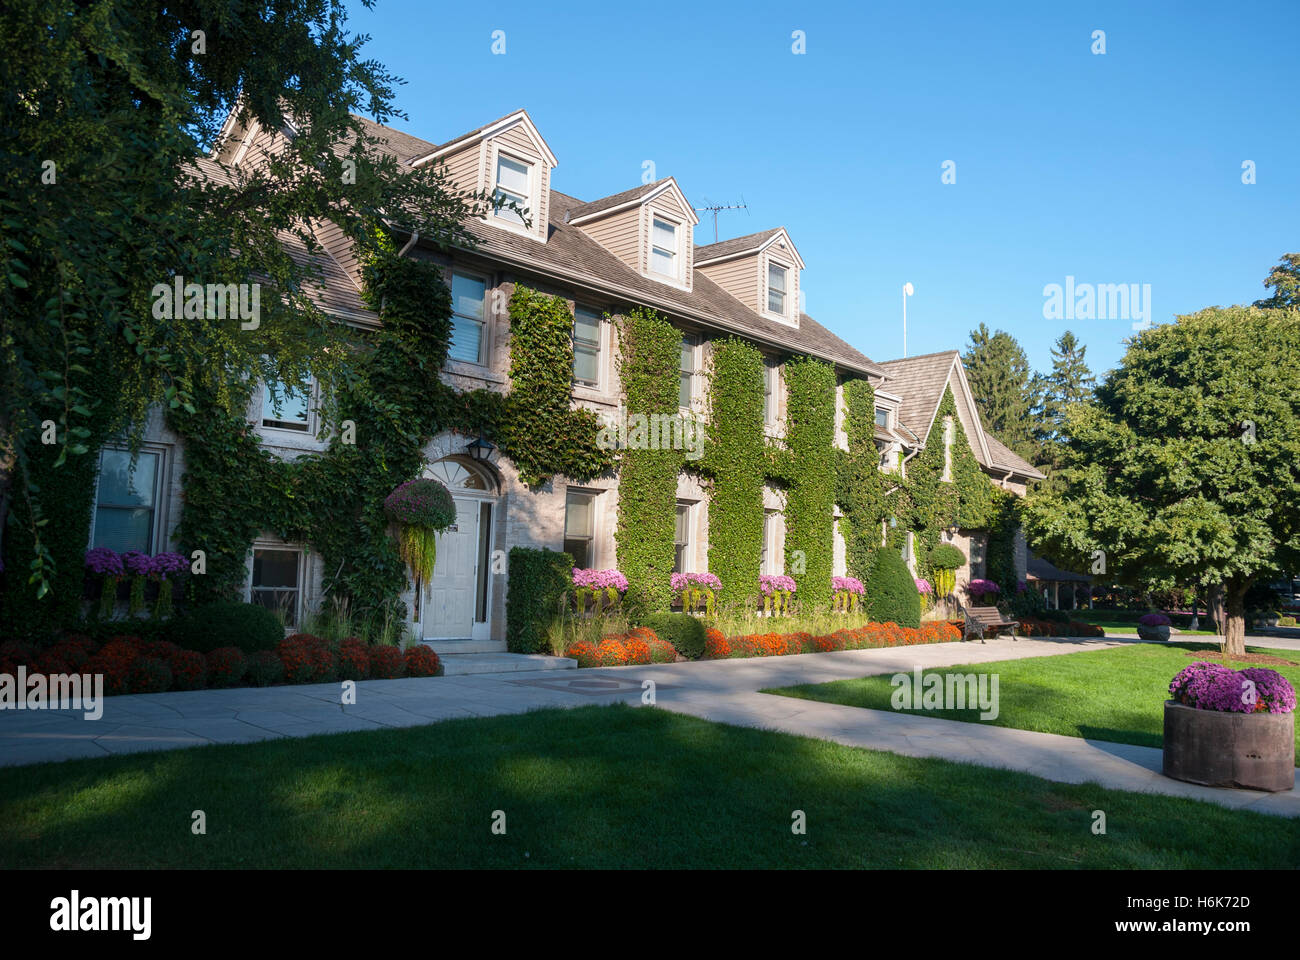 The ivy covered student residence at the Niagara Parks School of Horticulture at the Niagara parks botanical gardens Stock Photo